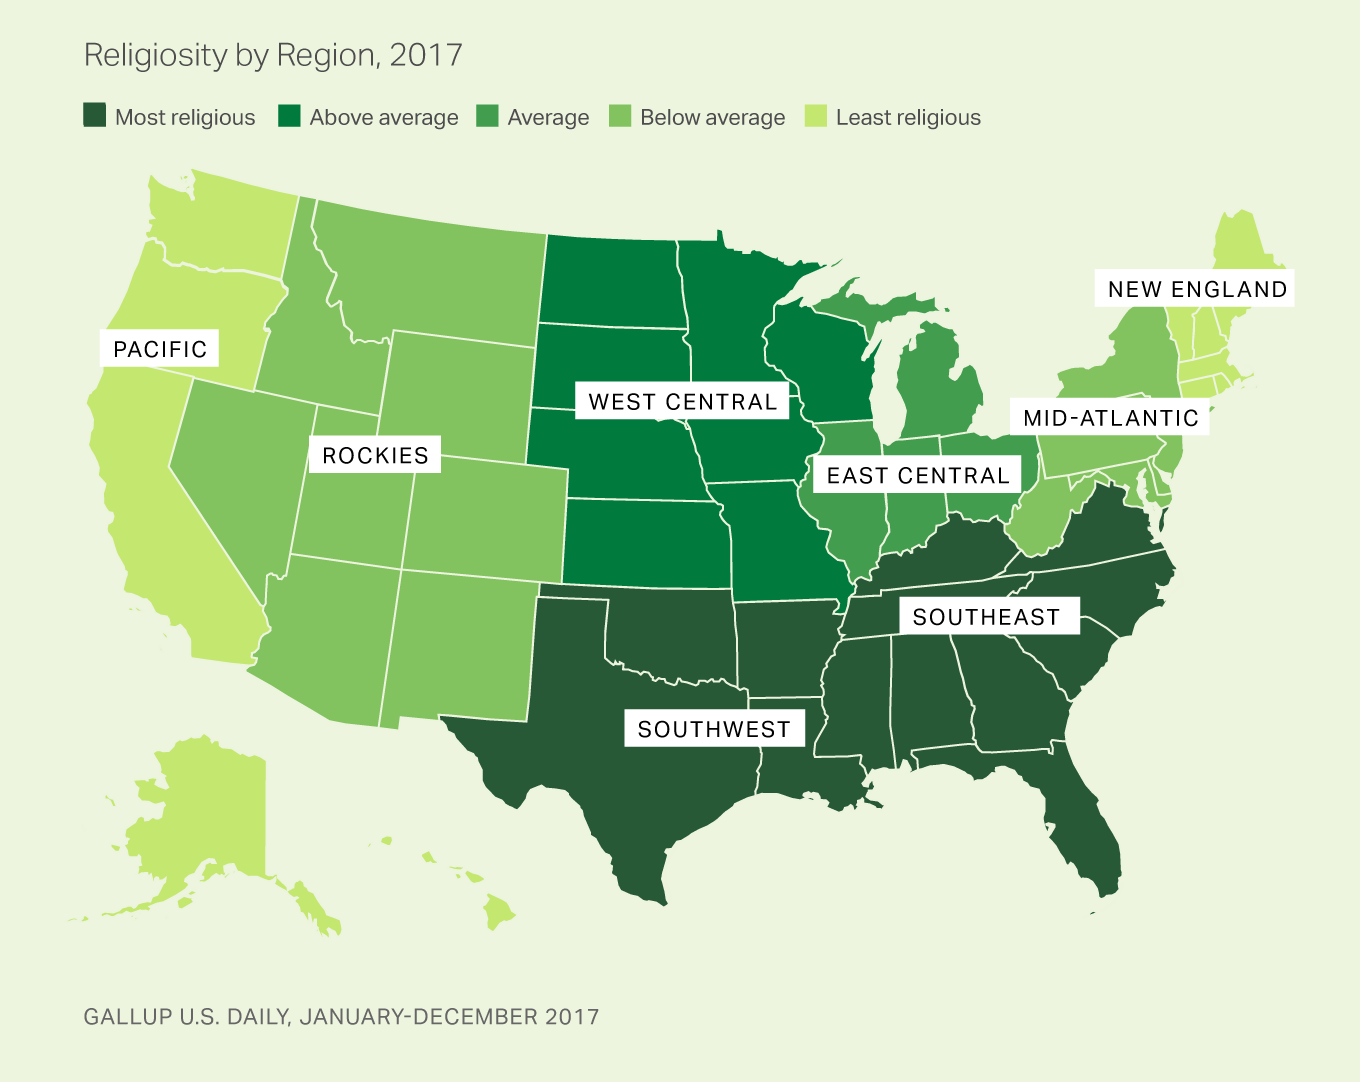 Map of U.S. Depicting U.S. Religiosity by Region for 2017. Southwest and Southeast regions have highest religiosity.